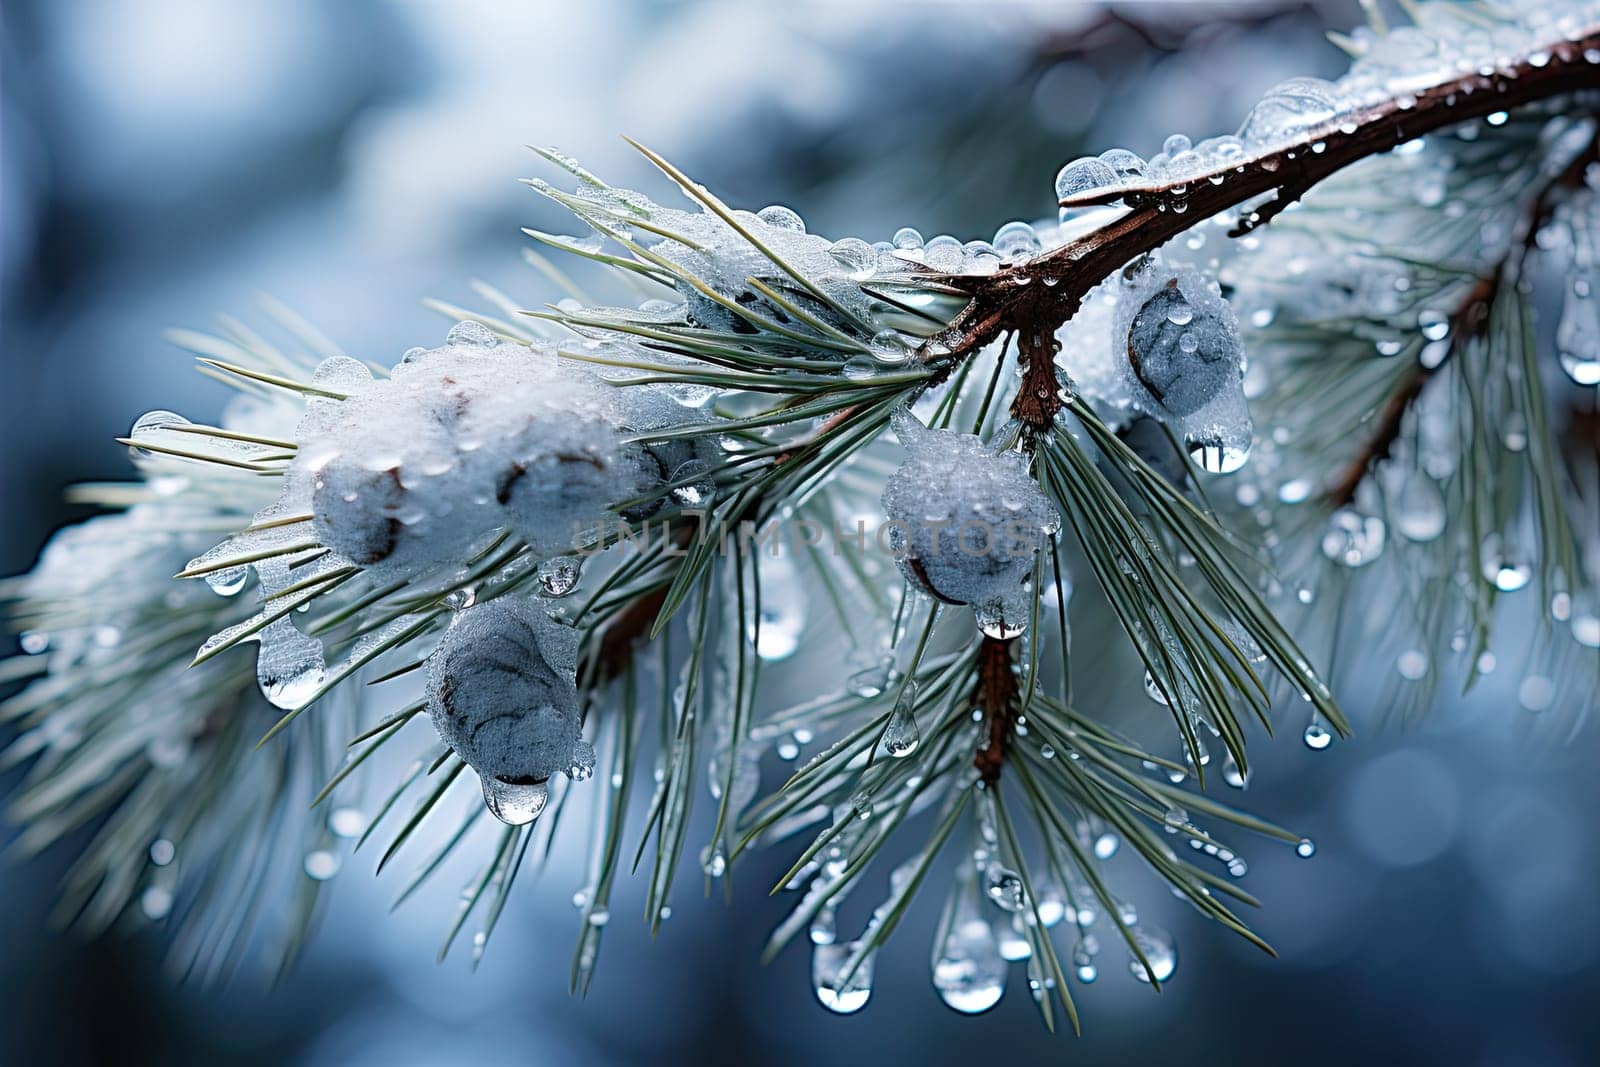 A close up of a pine tree with snow on it by golibtolibov